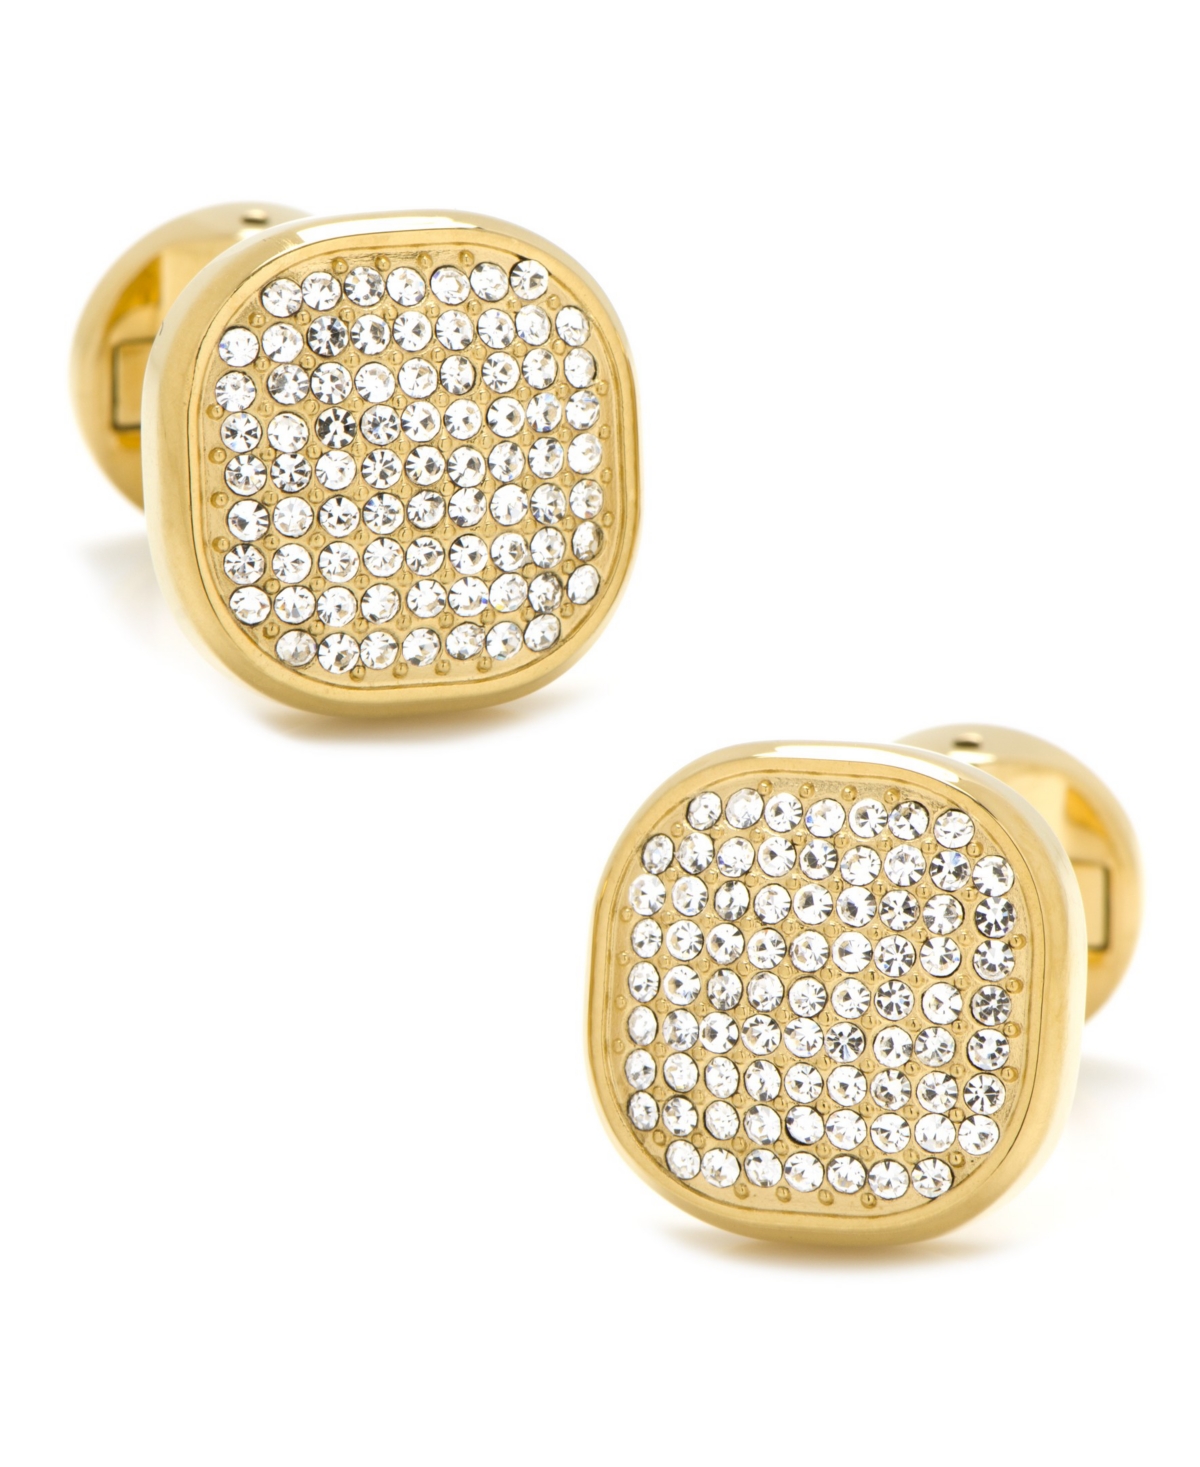 Stainless Steel White Pave Crystal Cufflinks - Gold